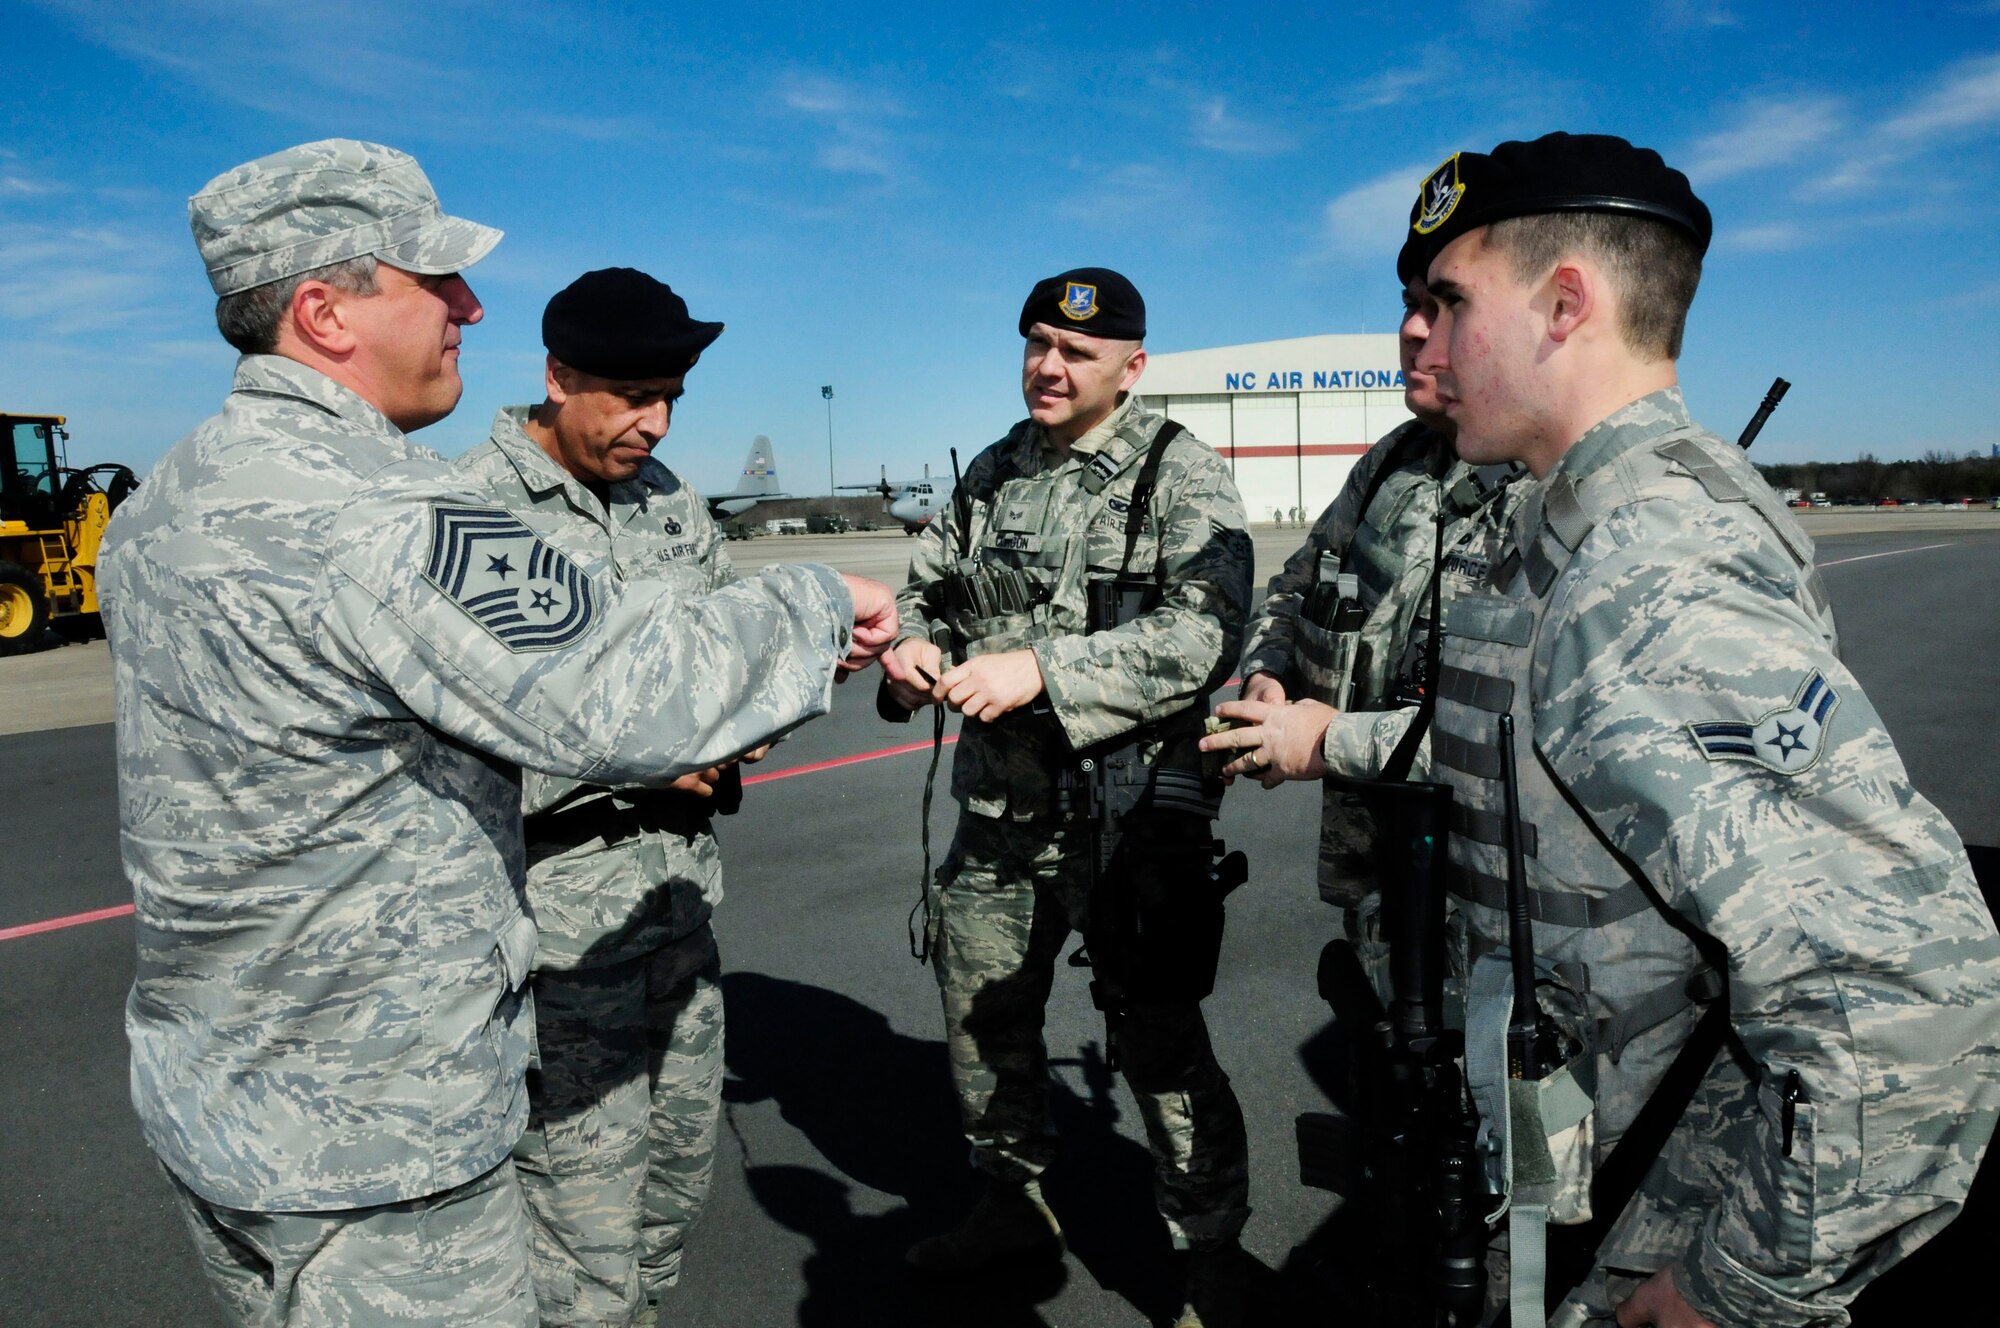 U.S. Air Force Command Chief Master Sgt. Salvatore “Sal” Pecorella, talks with members of the 145th Security Forces Squadron during February’s Unit Training Assembly at the North Carolina Air National Guard Base, Charlotte Douglas International Airport, Feb. 6, 2016. Pecorella, who was recently selected as the new command chief for the 145th Airlift Wing, stays in touch by keeping the lines of communication open. Pecorella began his military career when he enlisted in the Air Force in May 1983, now he continues his career by carrying out his duties as a traditional guardsman in the highest enlisted position. (U.S. Air National Guard photo by Master Sgt. Patricia F. Moran/Released) 